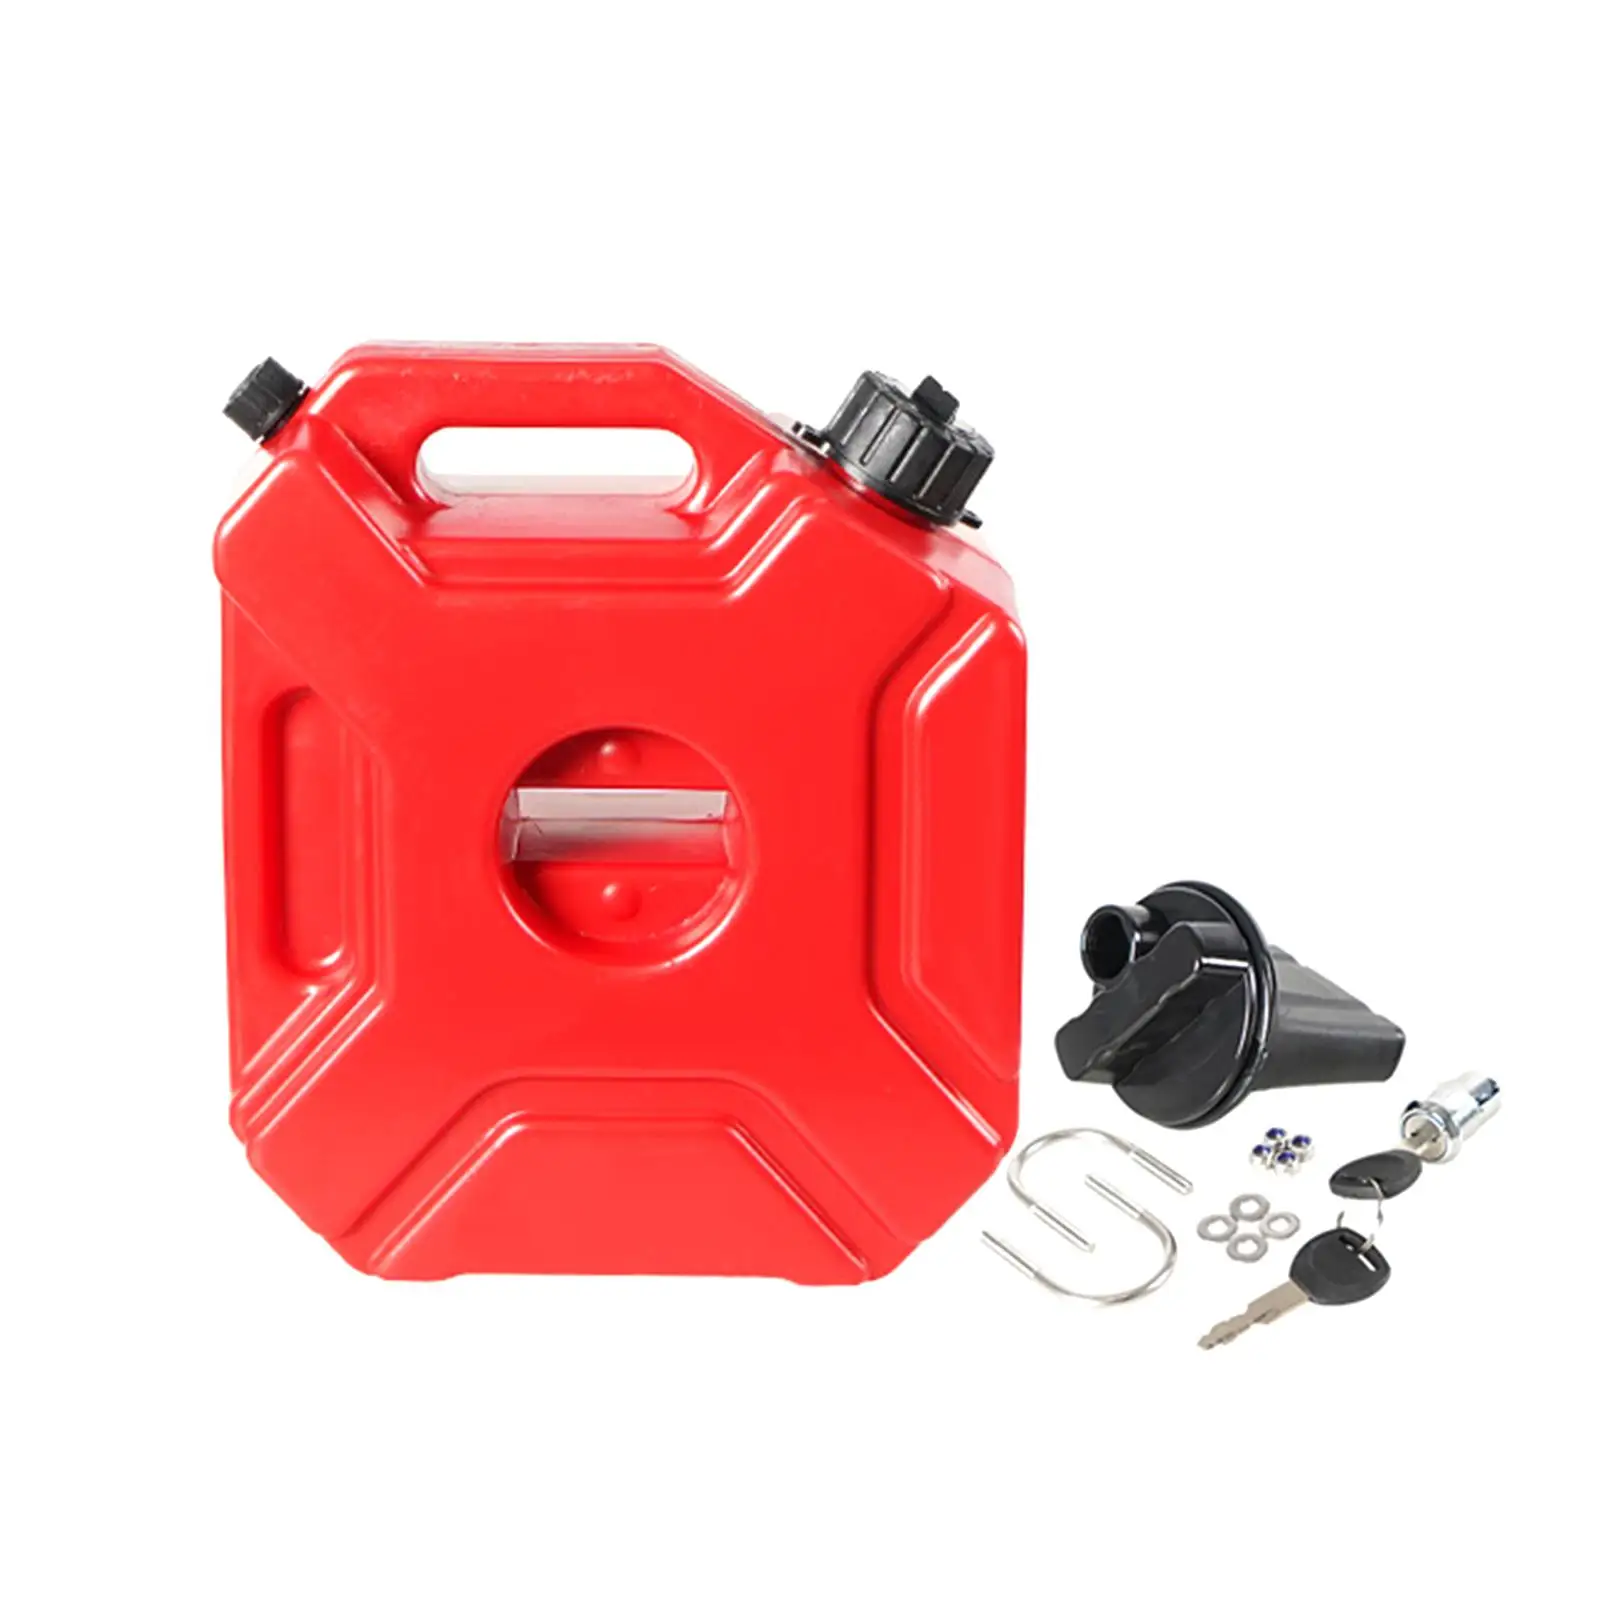 Petrol Tanks 5L with Lock Spare Tank for Motorcycle Most Cars Accessory